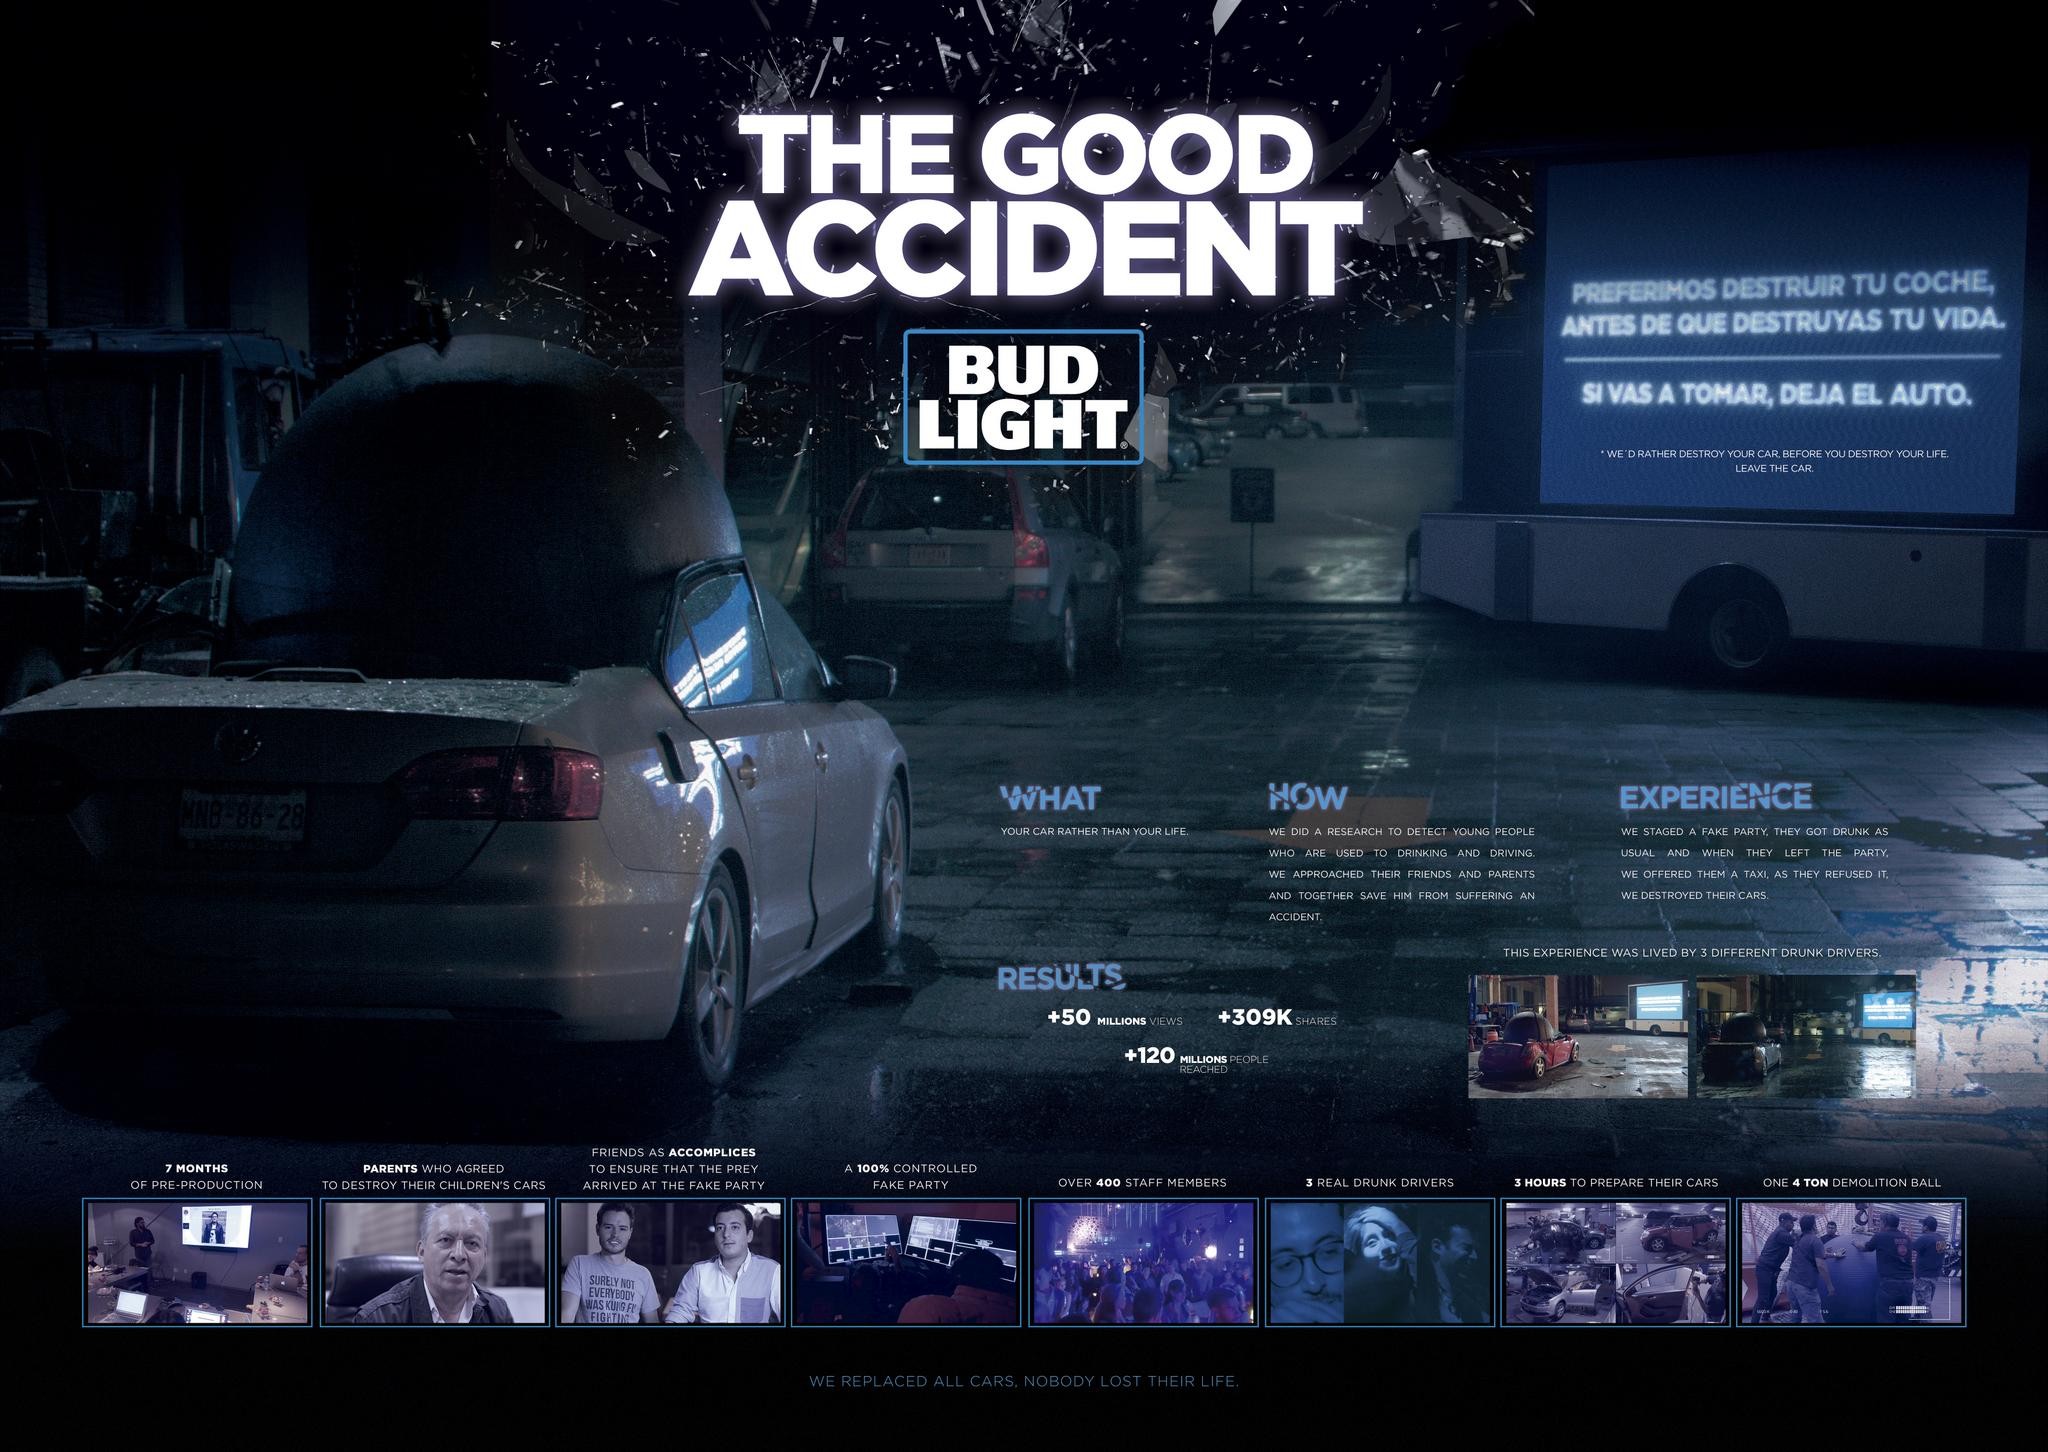 The Good Accident